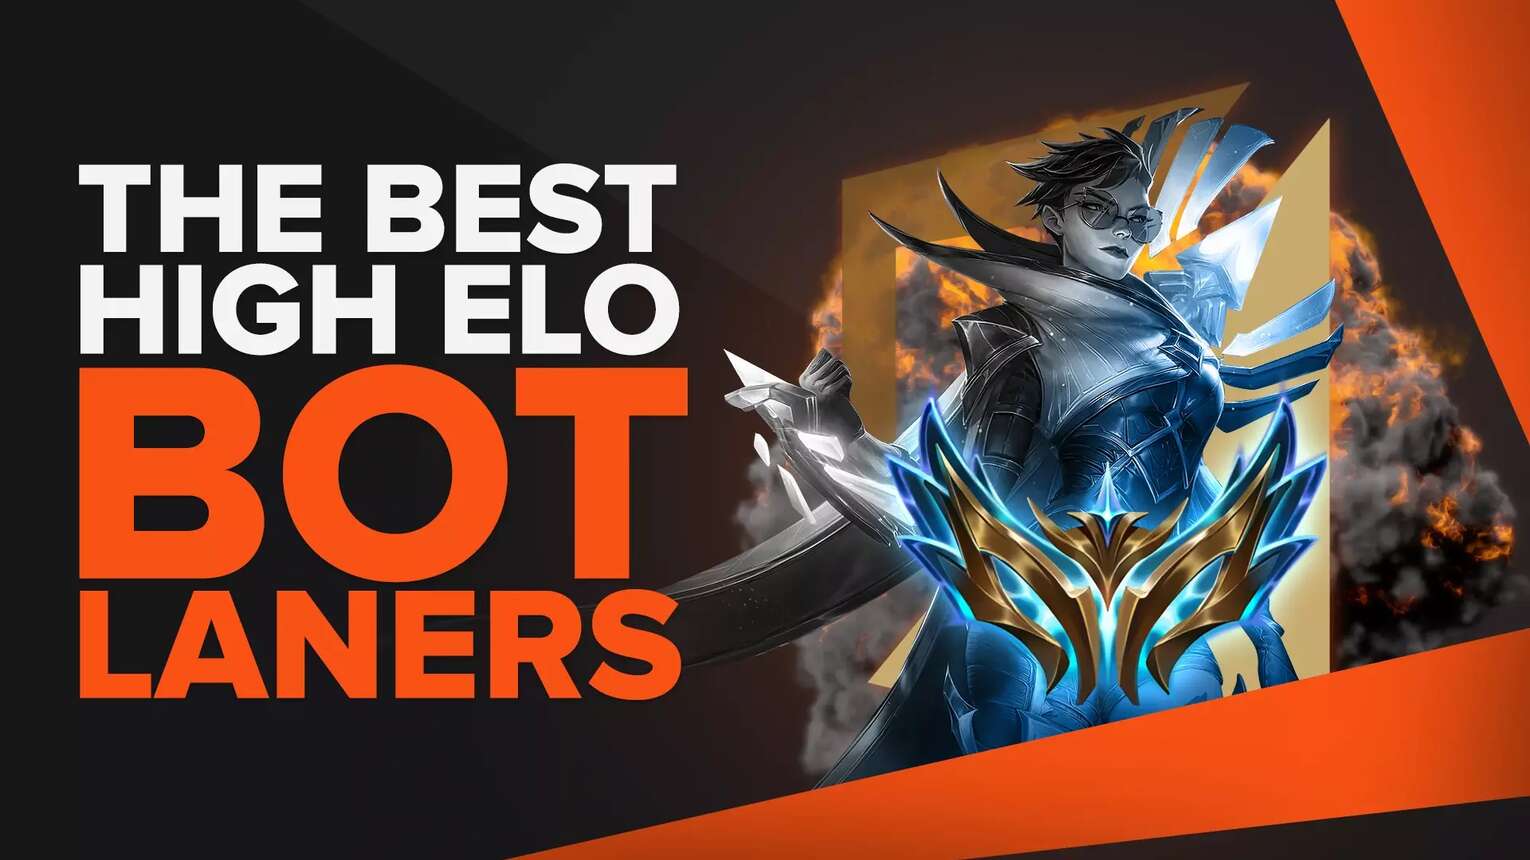 8 Best High Elo Bot Laners to Play in LoL SoloQ